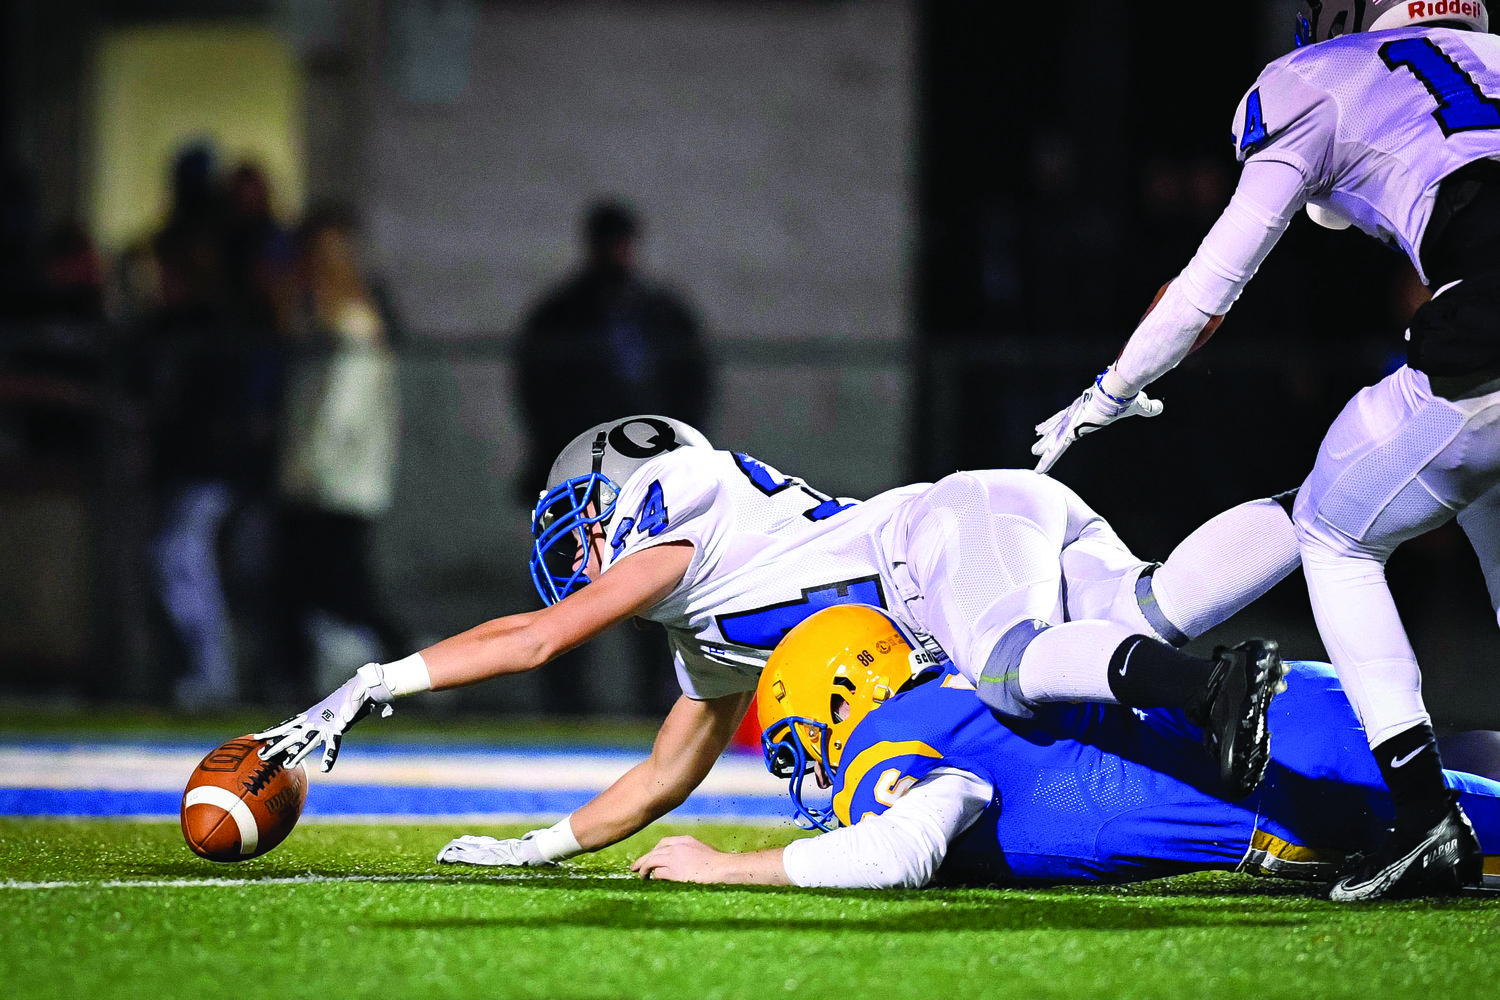 Quakertown’s Paul Lancos reaches for the ball at the goal line after blocking a Downingtown East punt.